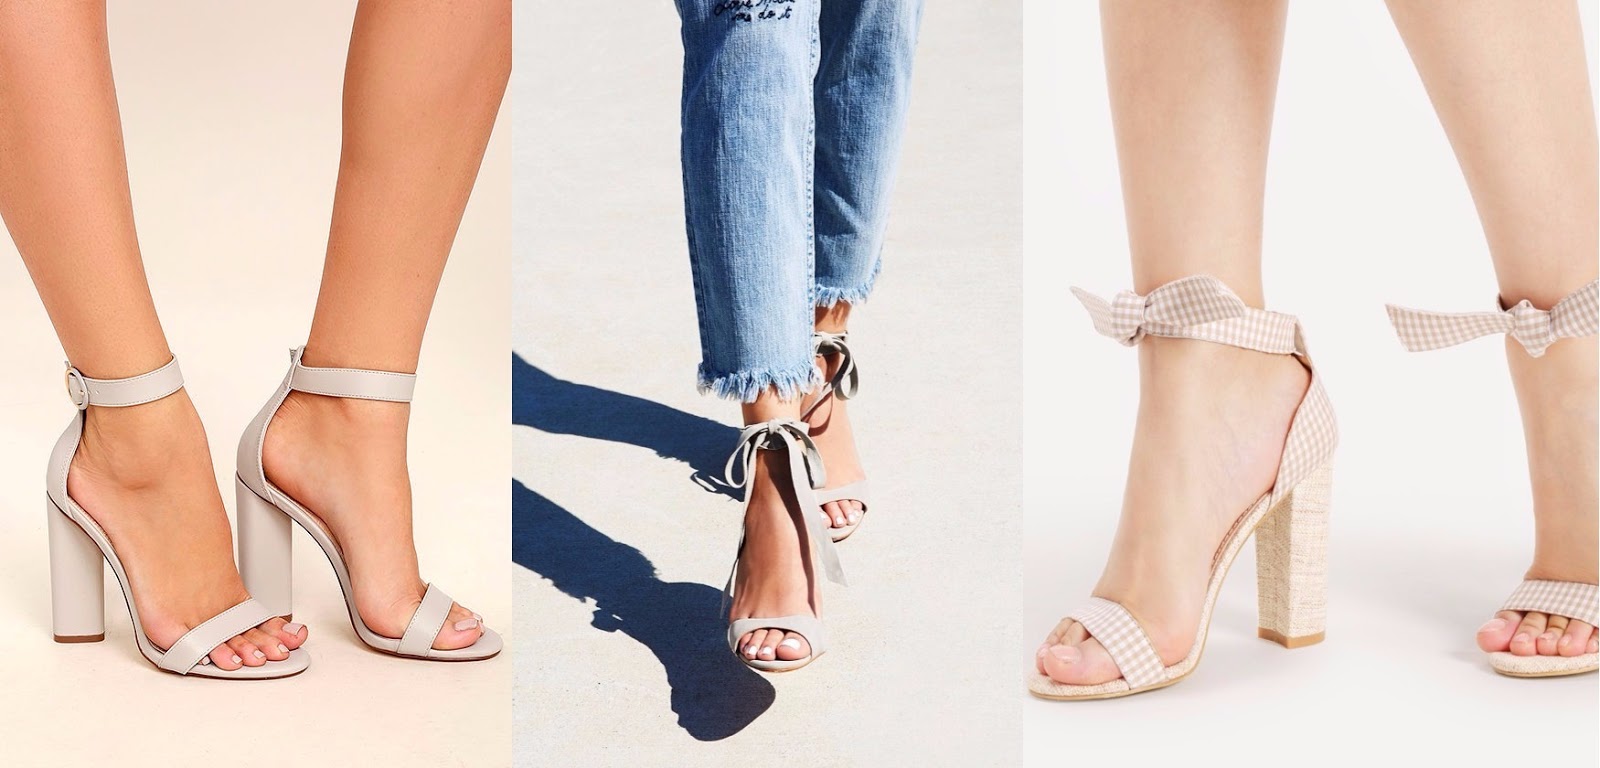 5 Shoes Every Woman Must Have